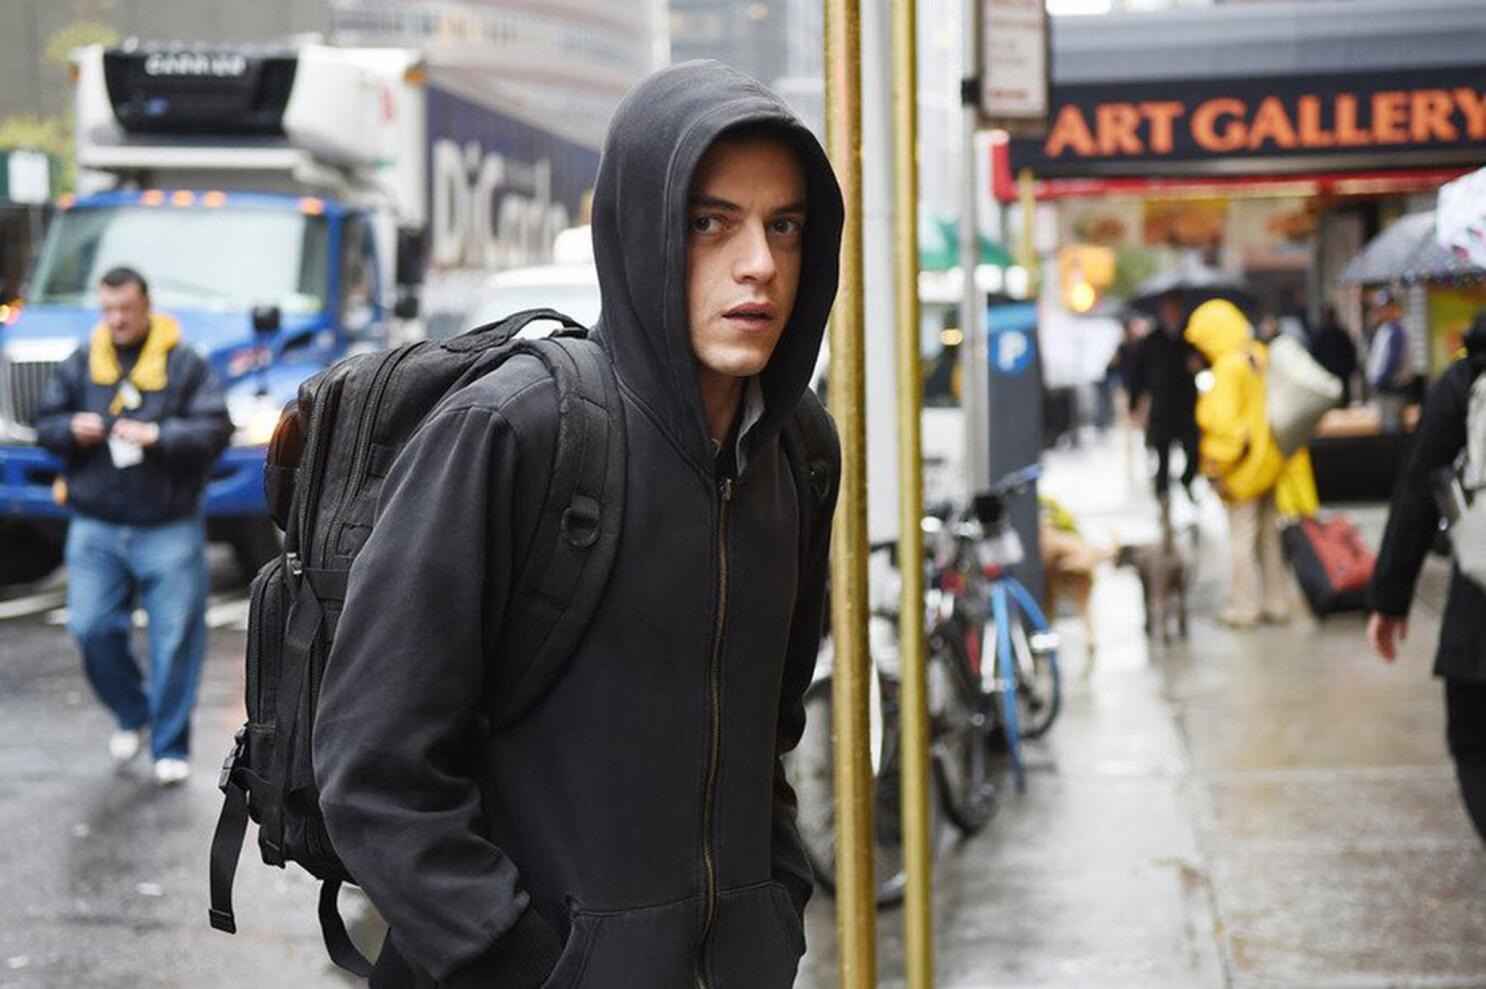 Mr. Robot' Season 2 cast appeared at San Diego Comic Con (which is going on  now)